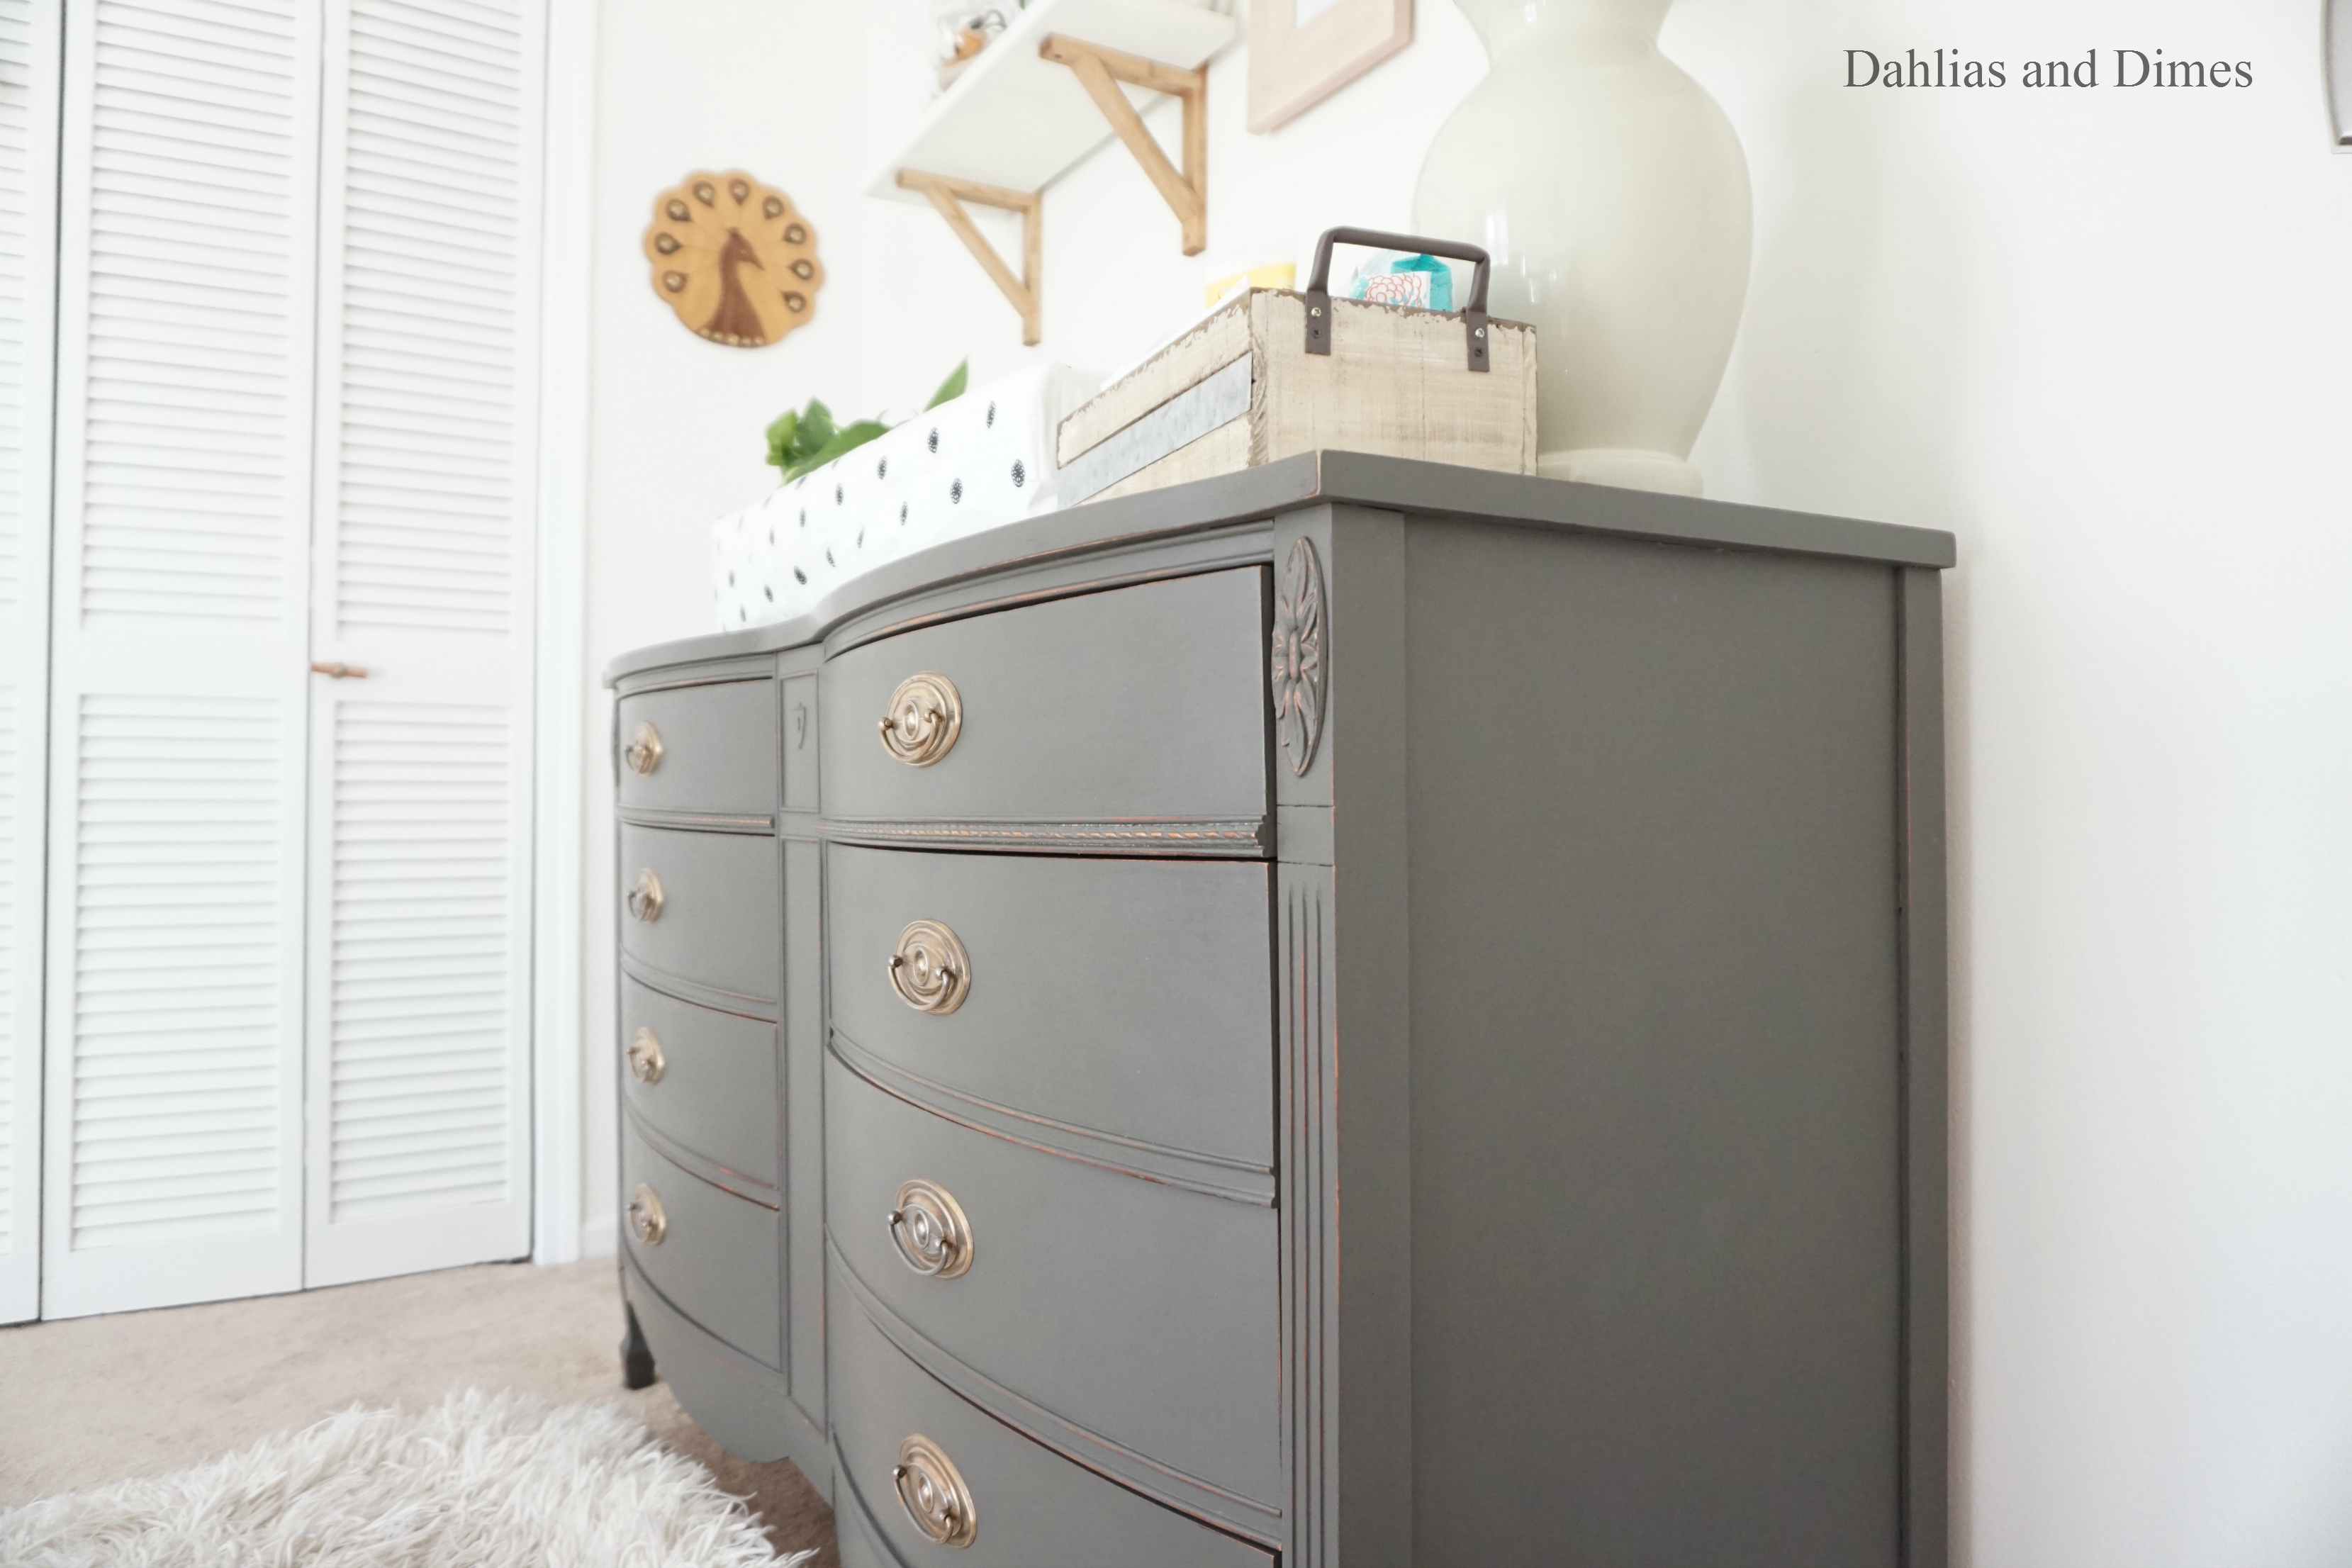 Beautiful DIY Distressed Gray Chalk Paint Furniture Makeover